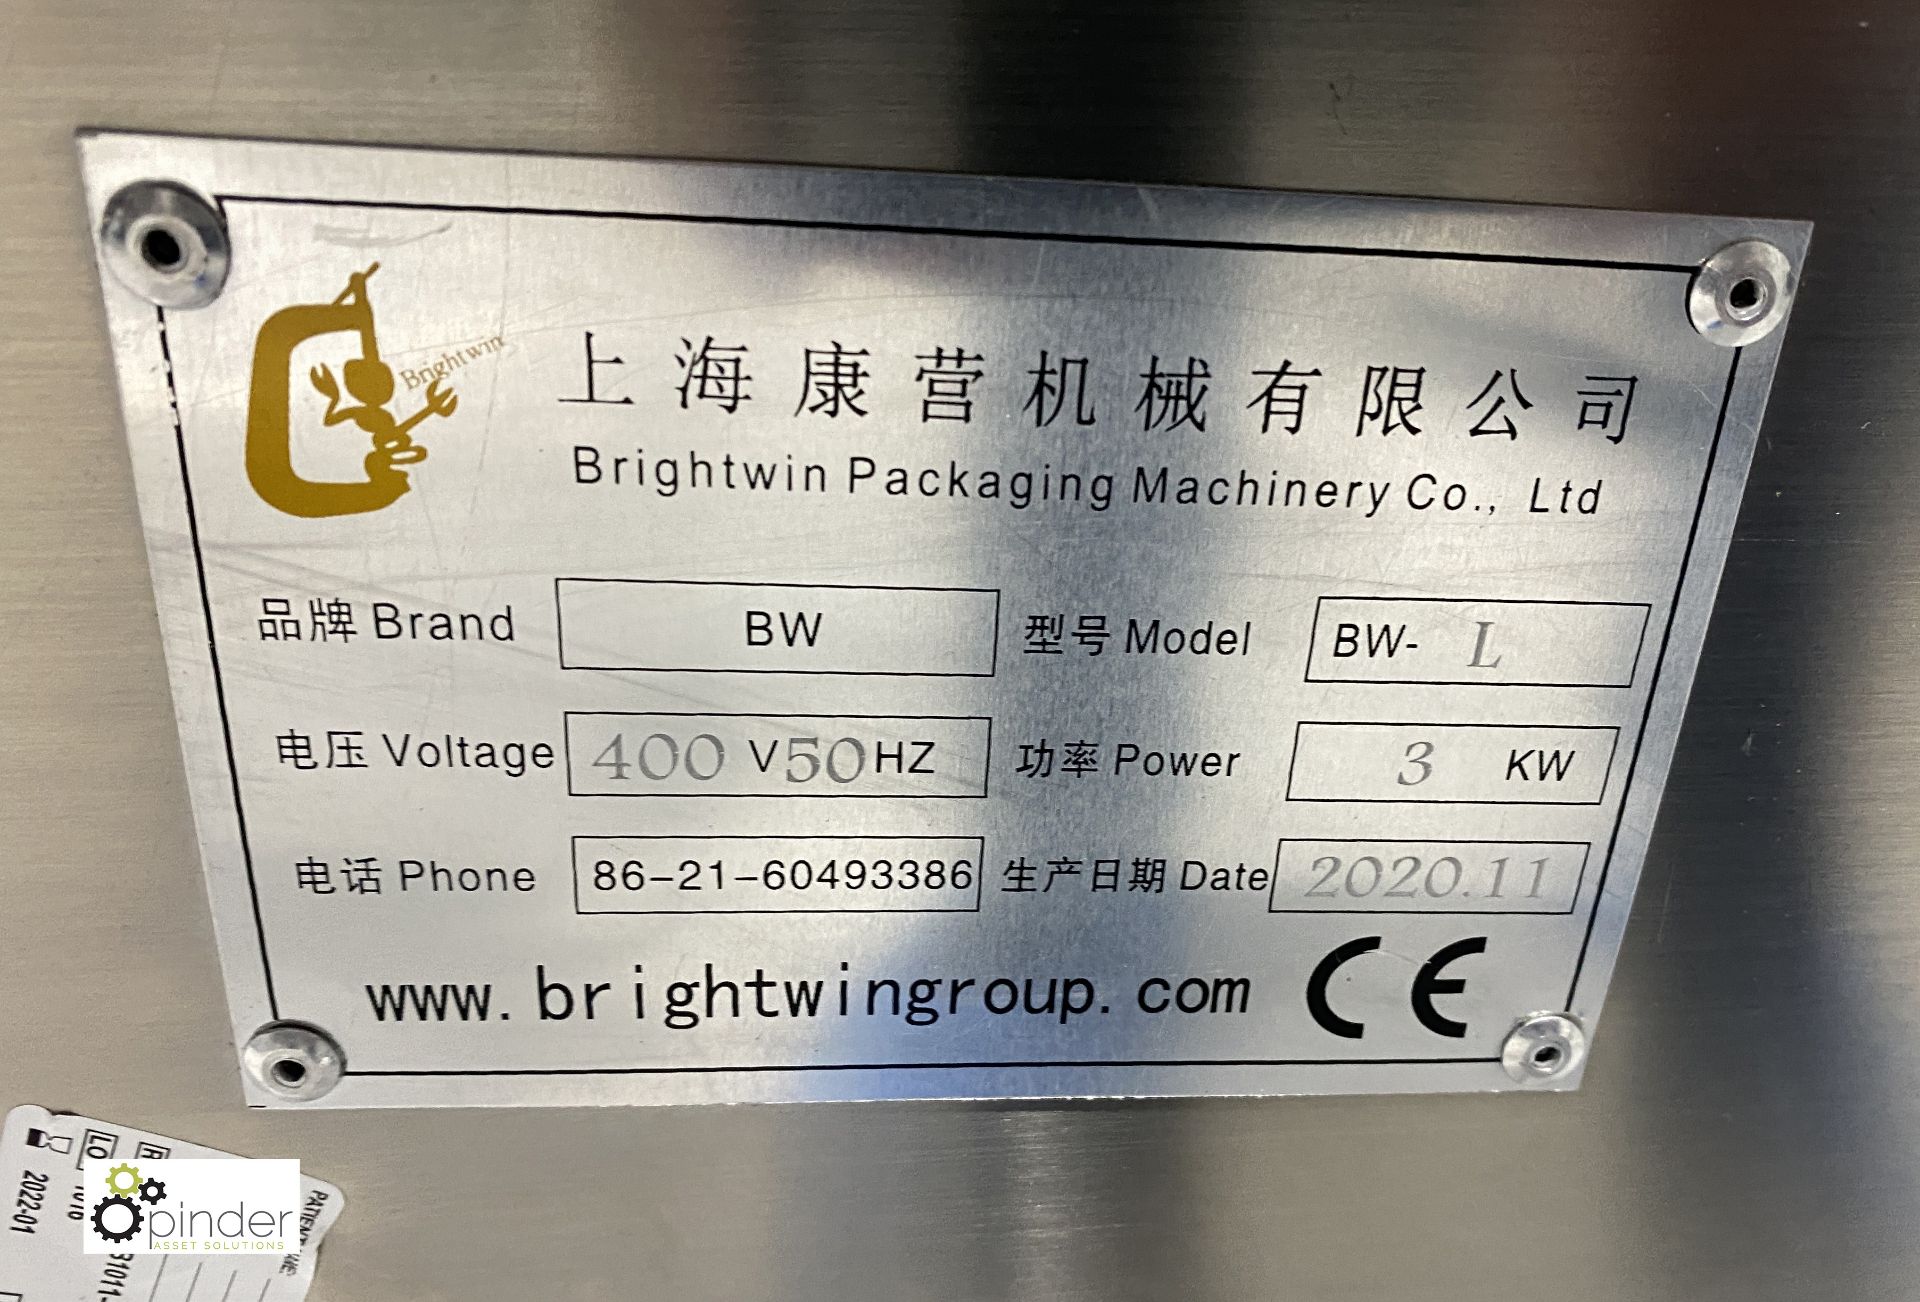 Brightwin Packaging Machinery Co Ltd BWL stainless steel Labeller for use applying labels to - Image 5 of 13